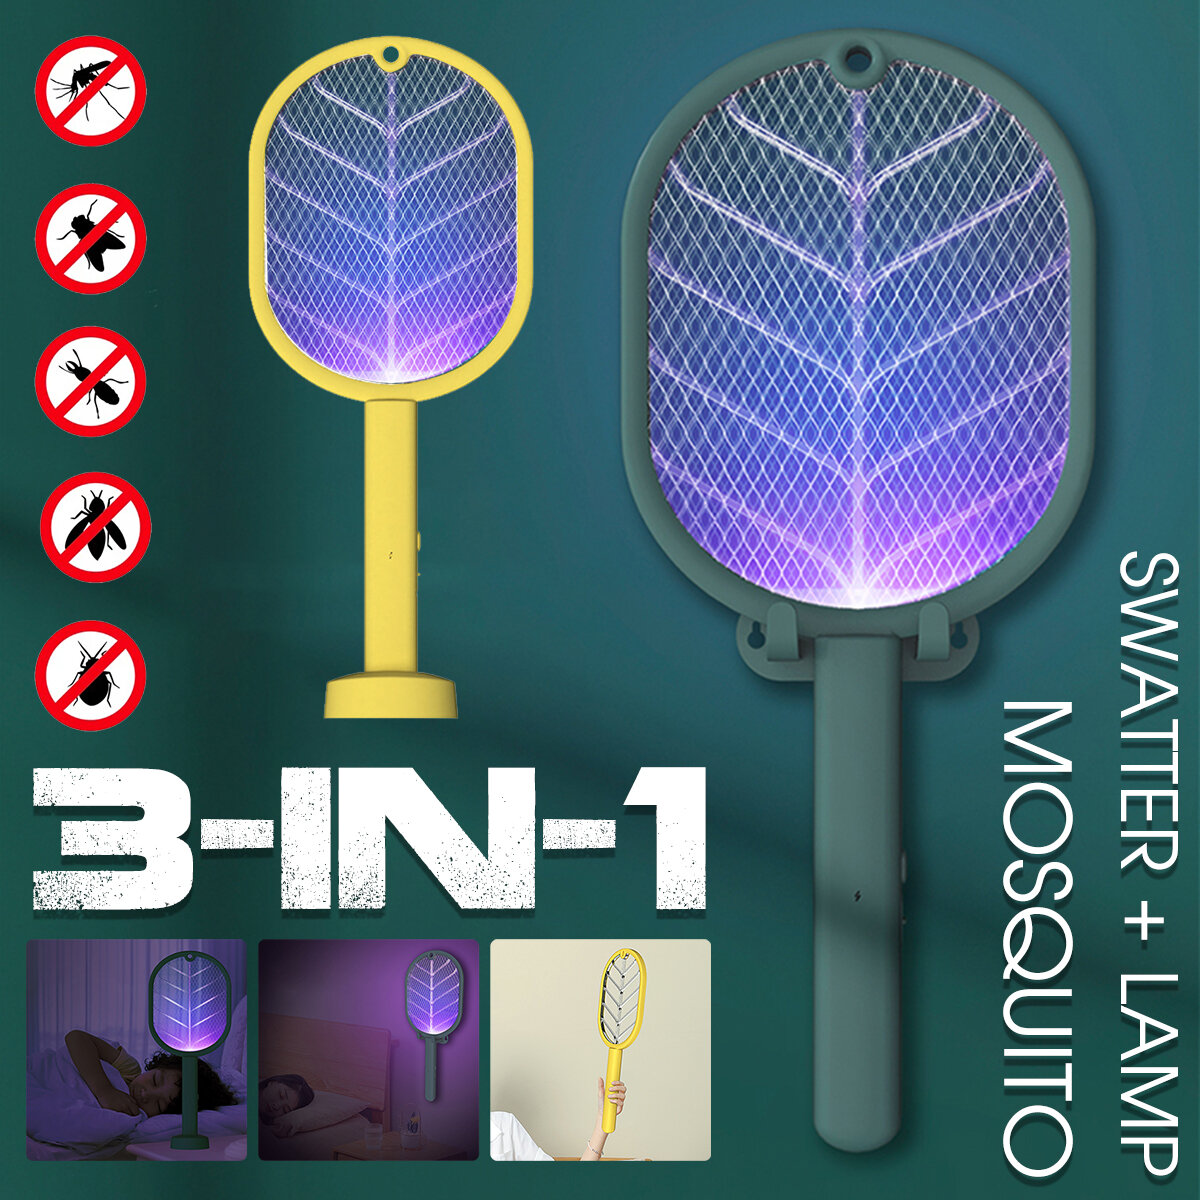 Bakeey 3-In-1 Electric Mosquito Swatter 368mm ultraviolet light LED Lamp Mosquito Killer